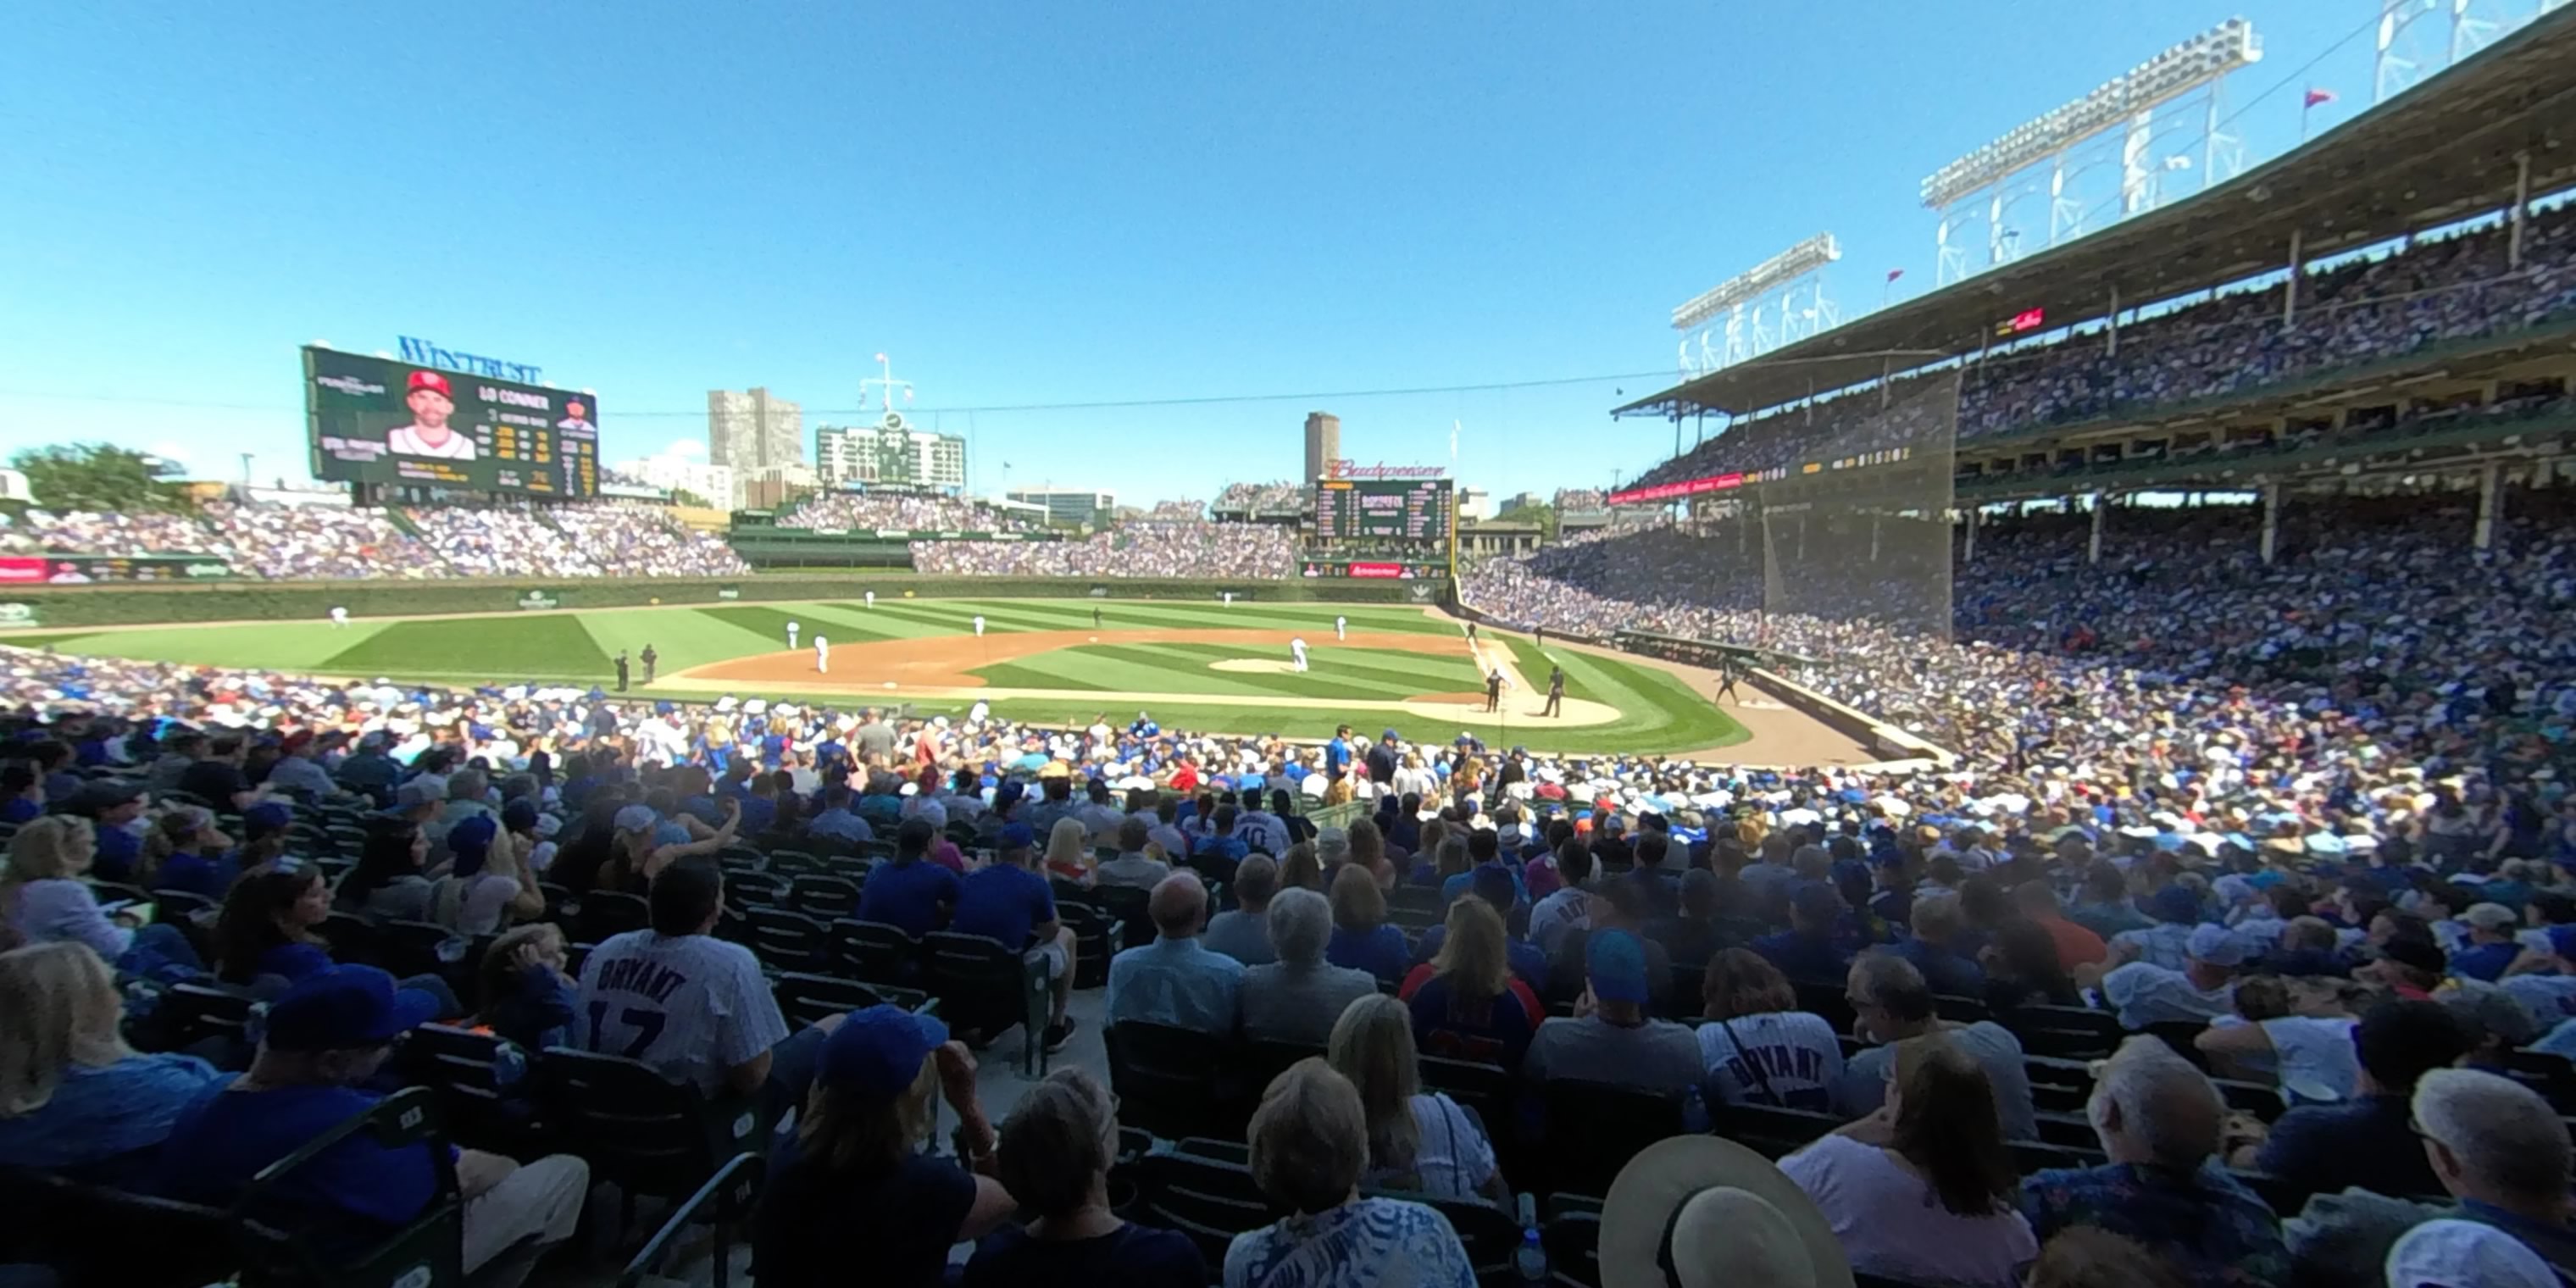 section 113 panoramic seat view  for baseball - wrigley field